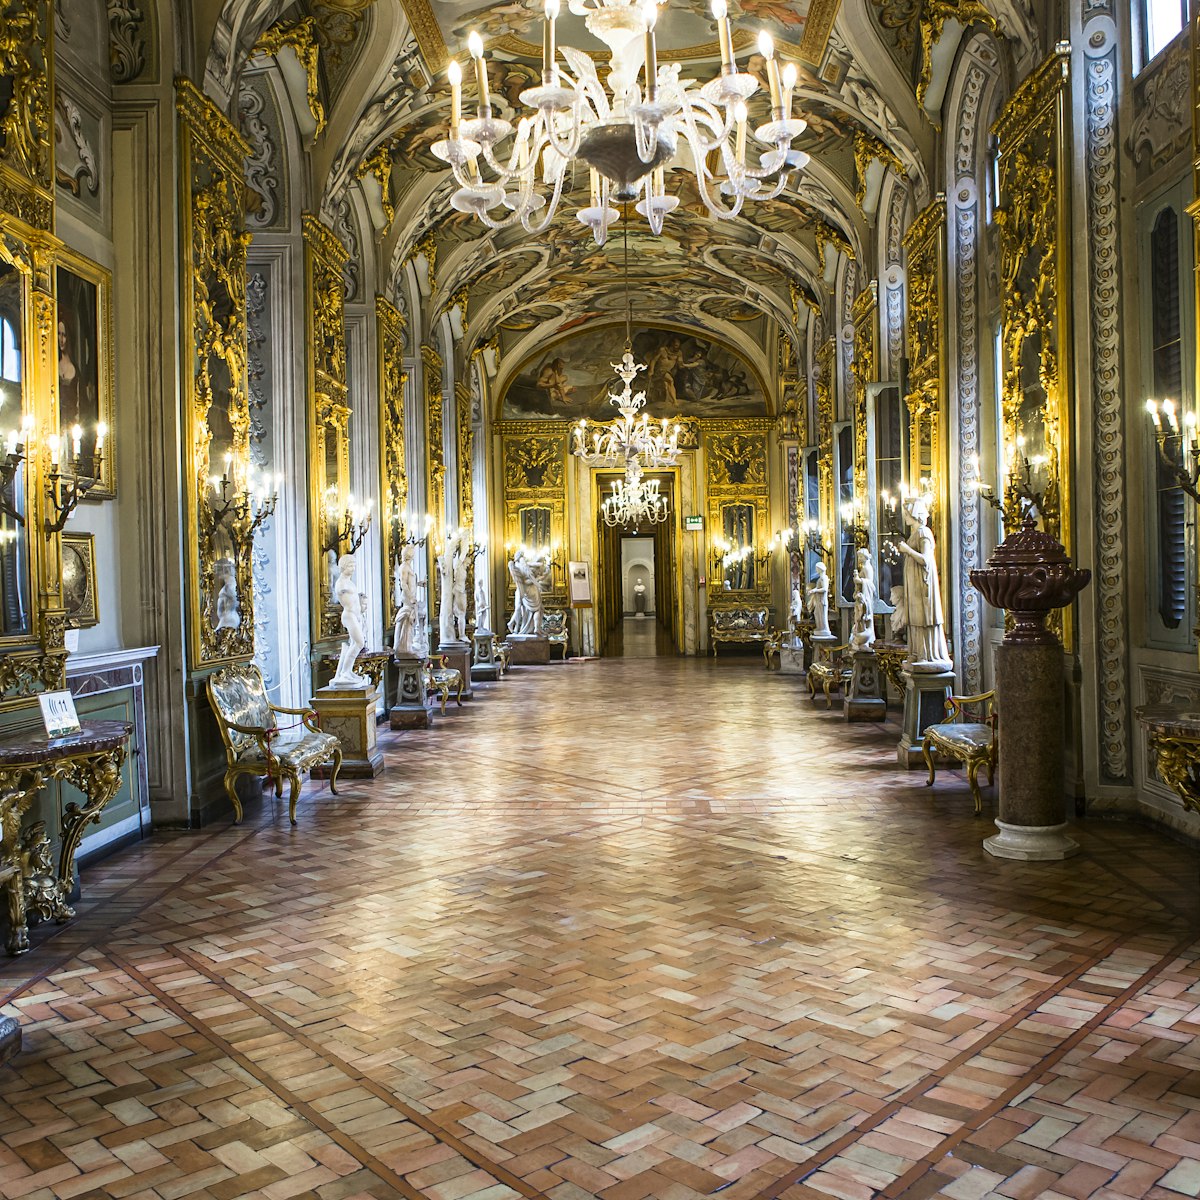 ROME, ITALY, JUNE 14, 2015 : interiors and architectural details of Doria Pamphilj Gallery, june 14, 2015, in Rome, Italy; Shutterstock ID 310592036; Your name (First / Last): Josh Vogel; Project no. or GL code: 56530; Network activity no. or Cost Centre: Online-Design; Product or Project: 65050/7529/Josh Vogel/LP.com Destination Galleries